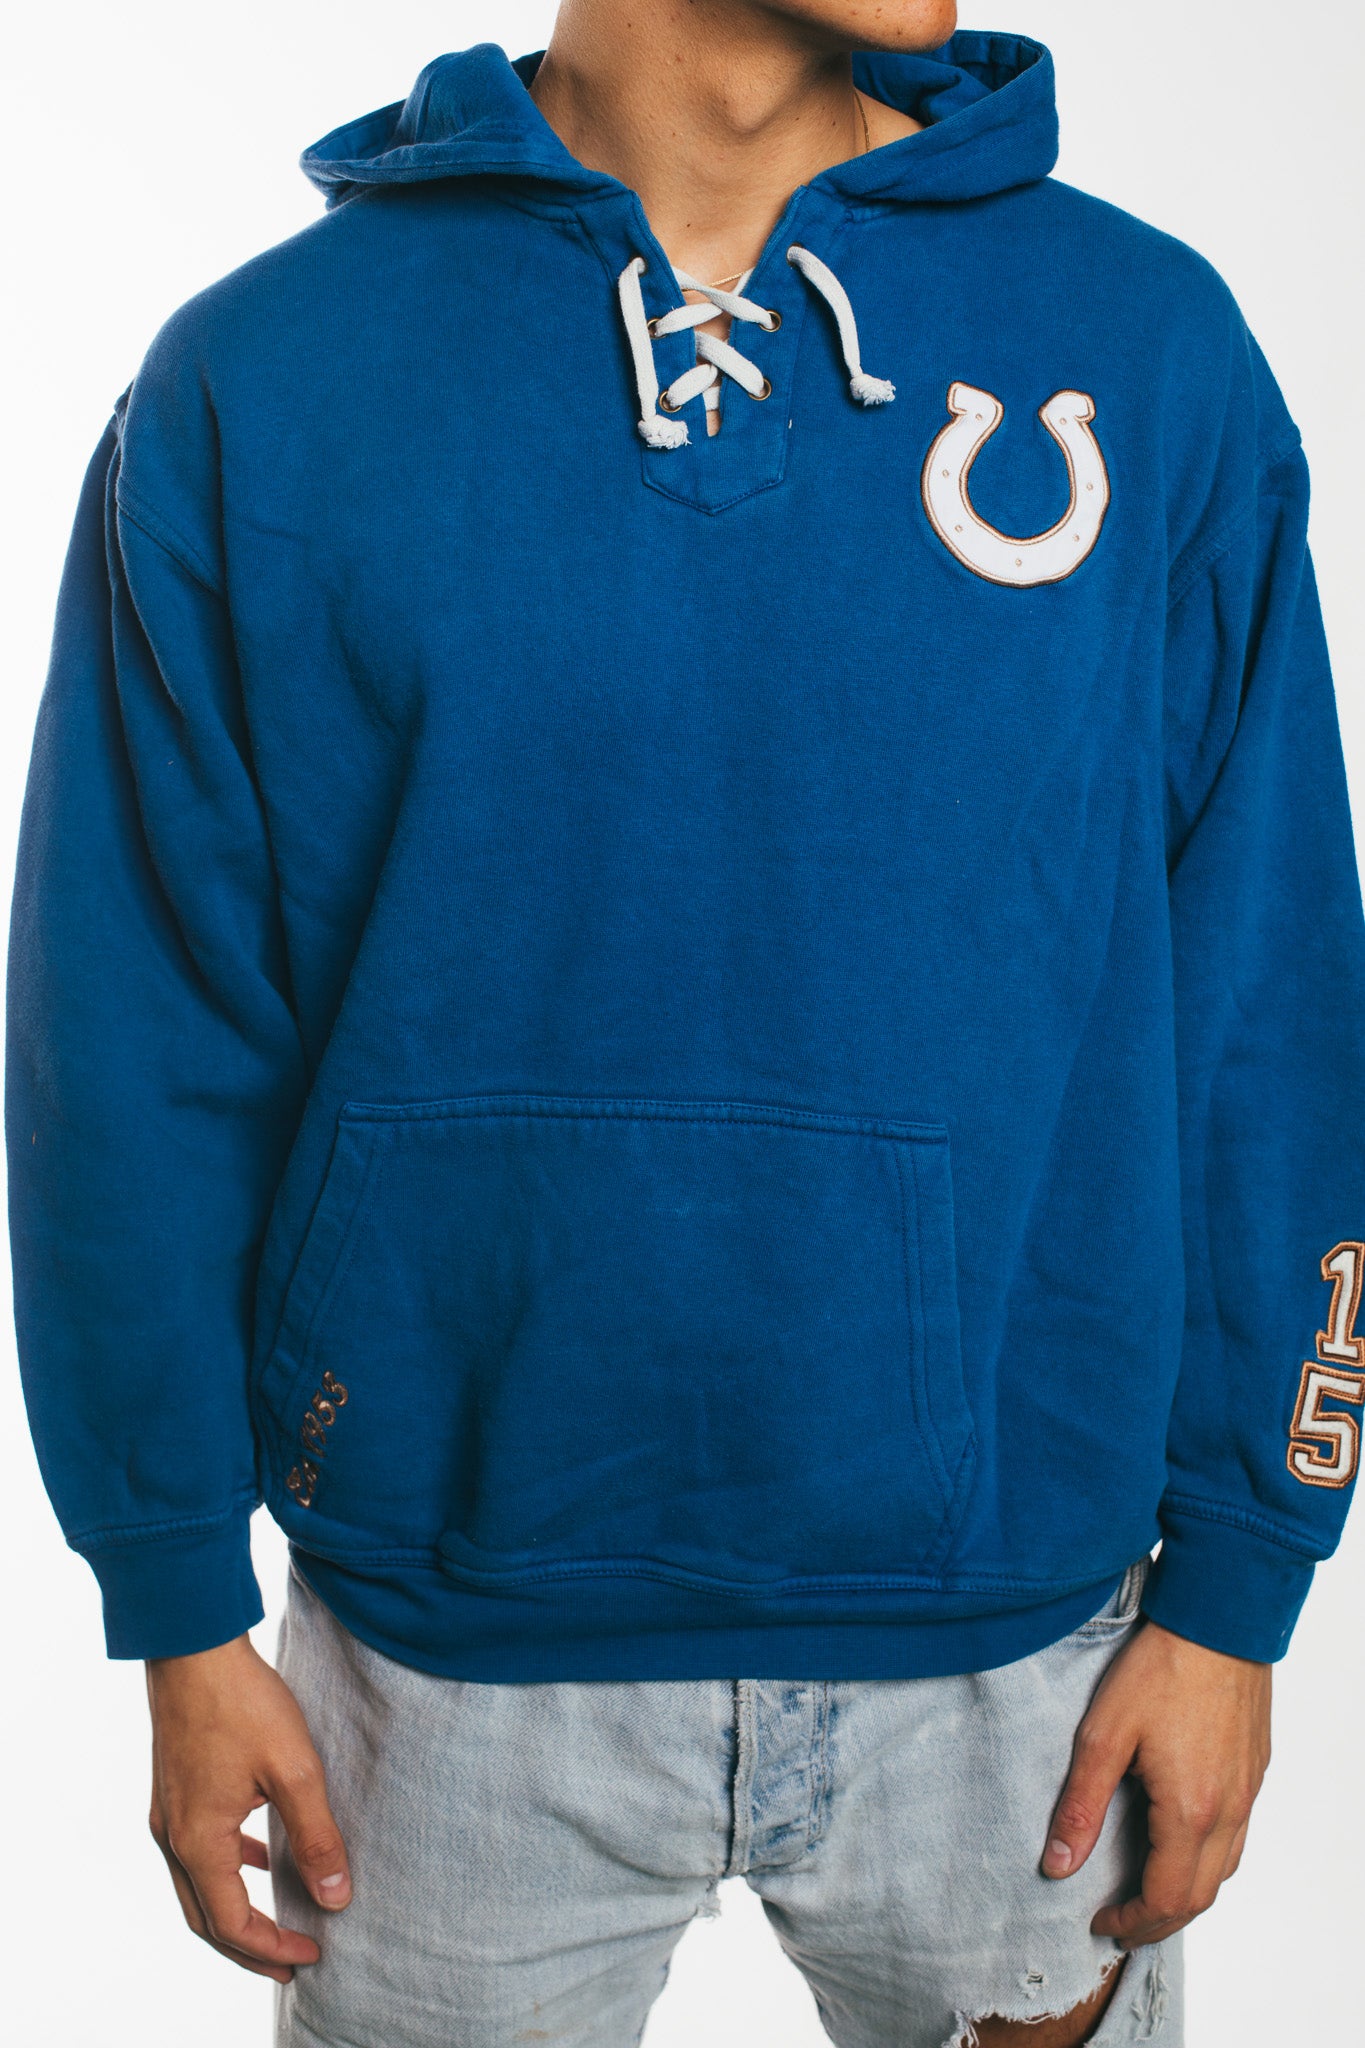 Colts Indiana - Hoodie (M)